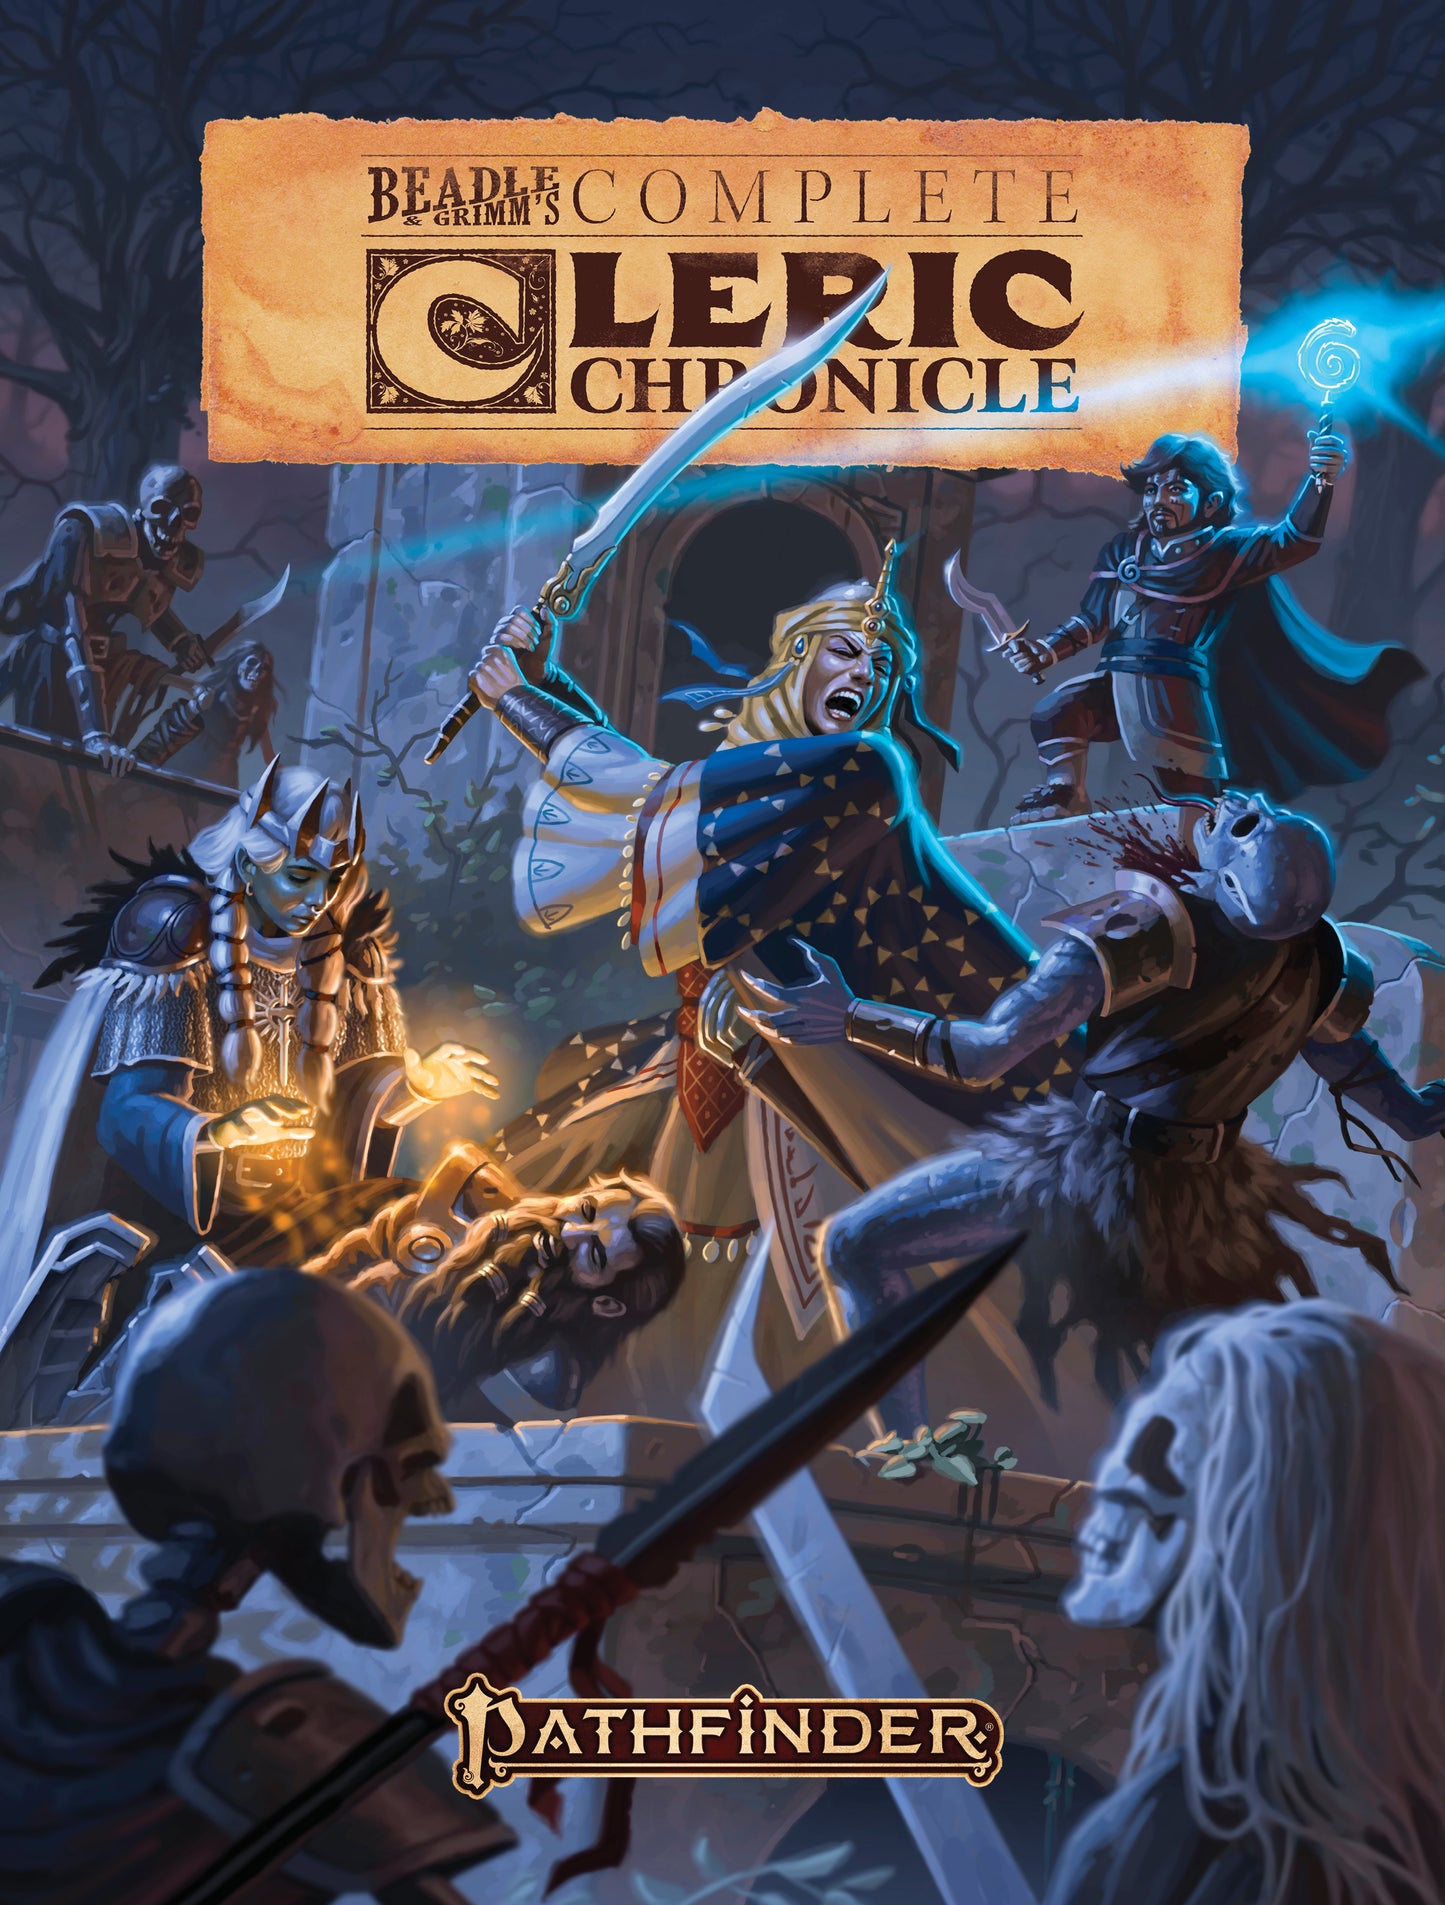 Limited Edition of Cleric Character Chronicle